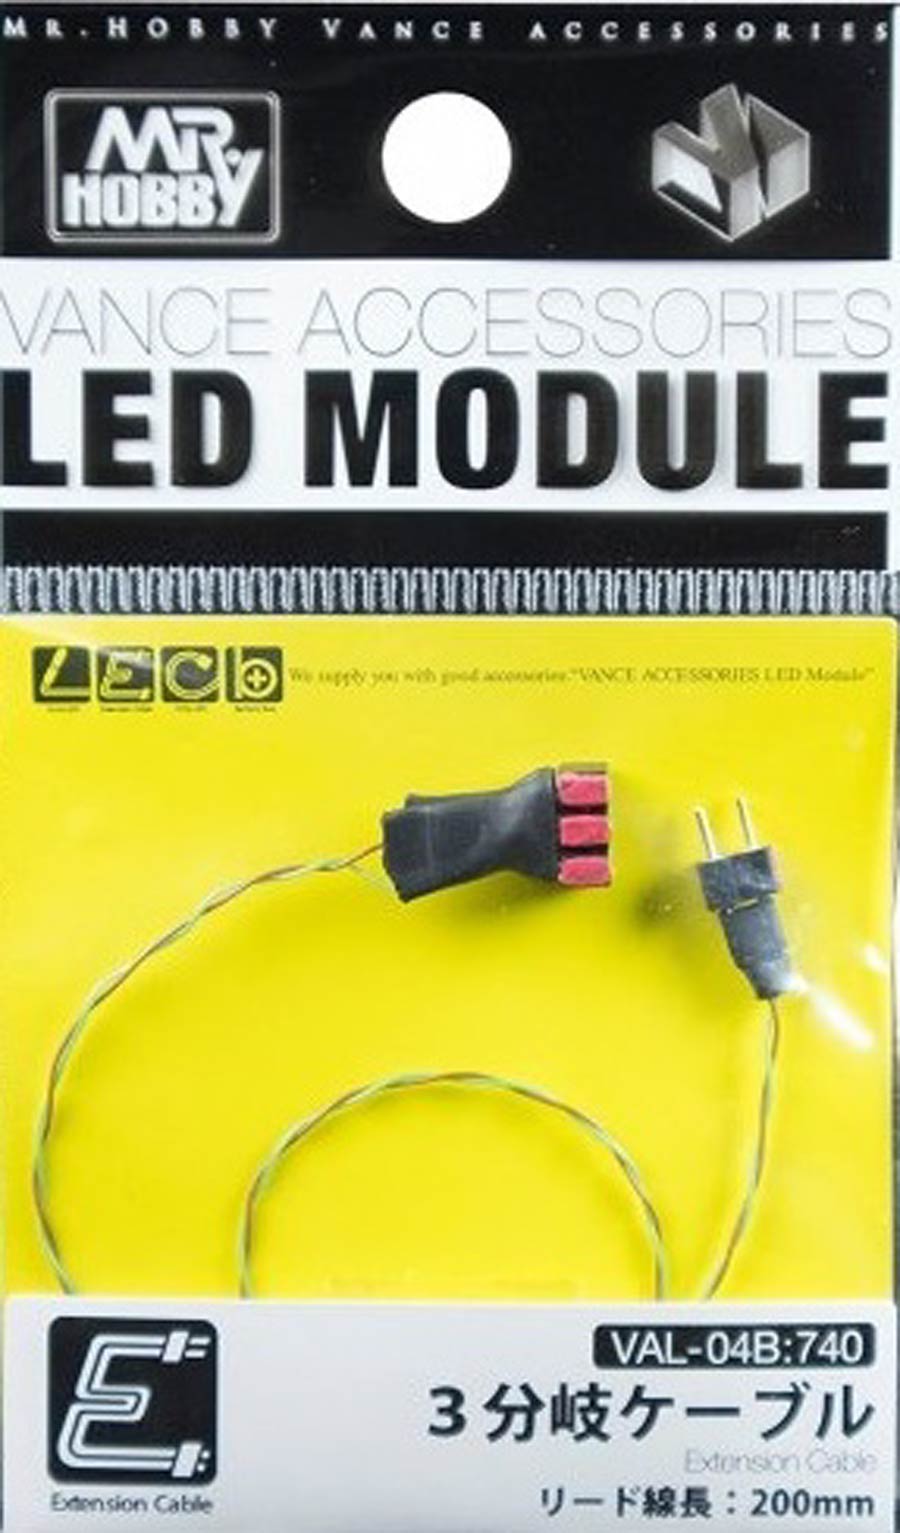 Mr. Hobby Vance Accessories LED Module - 3 Branch Extension Cable